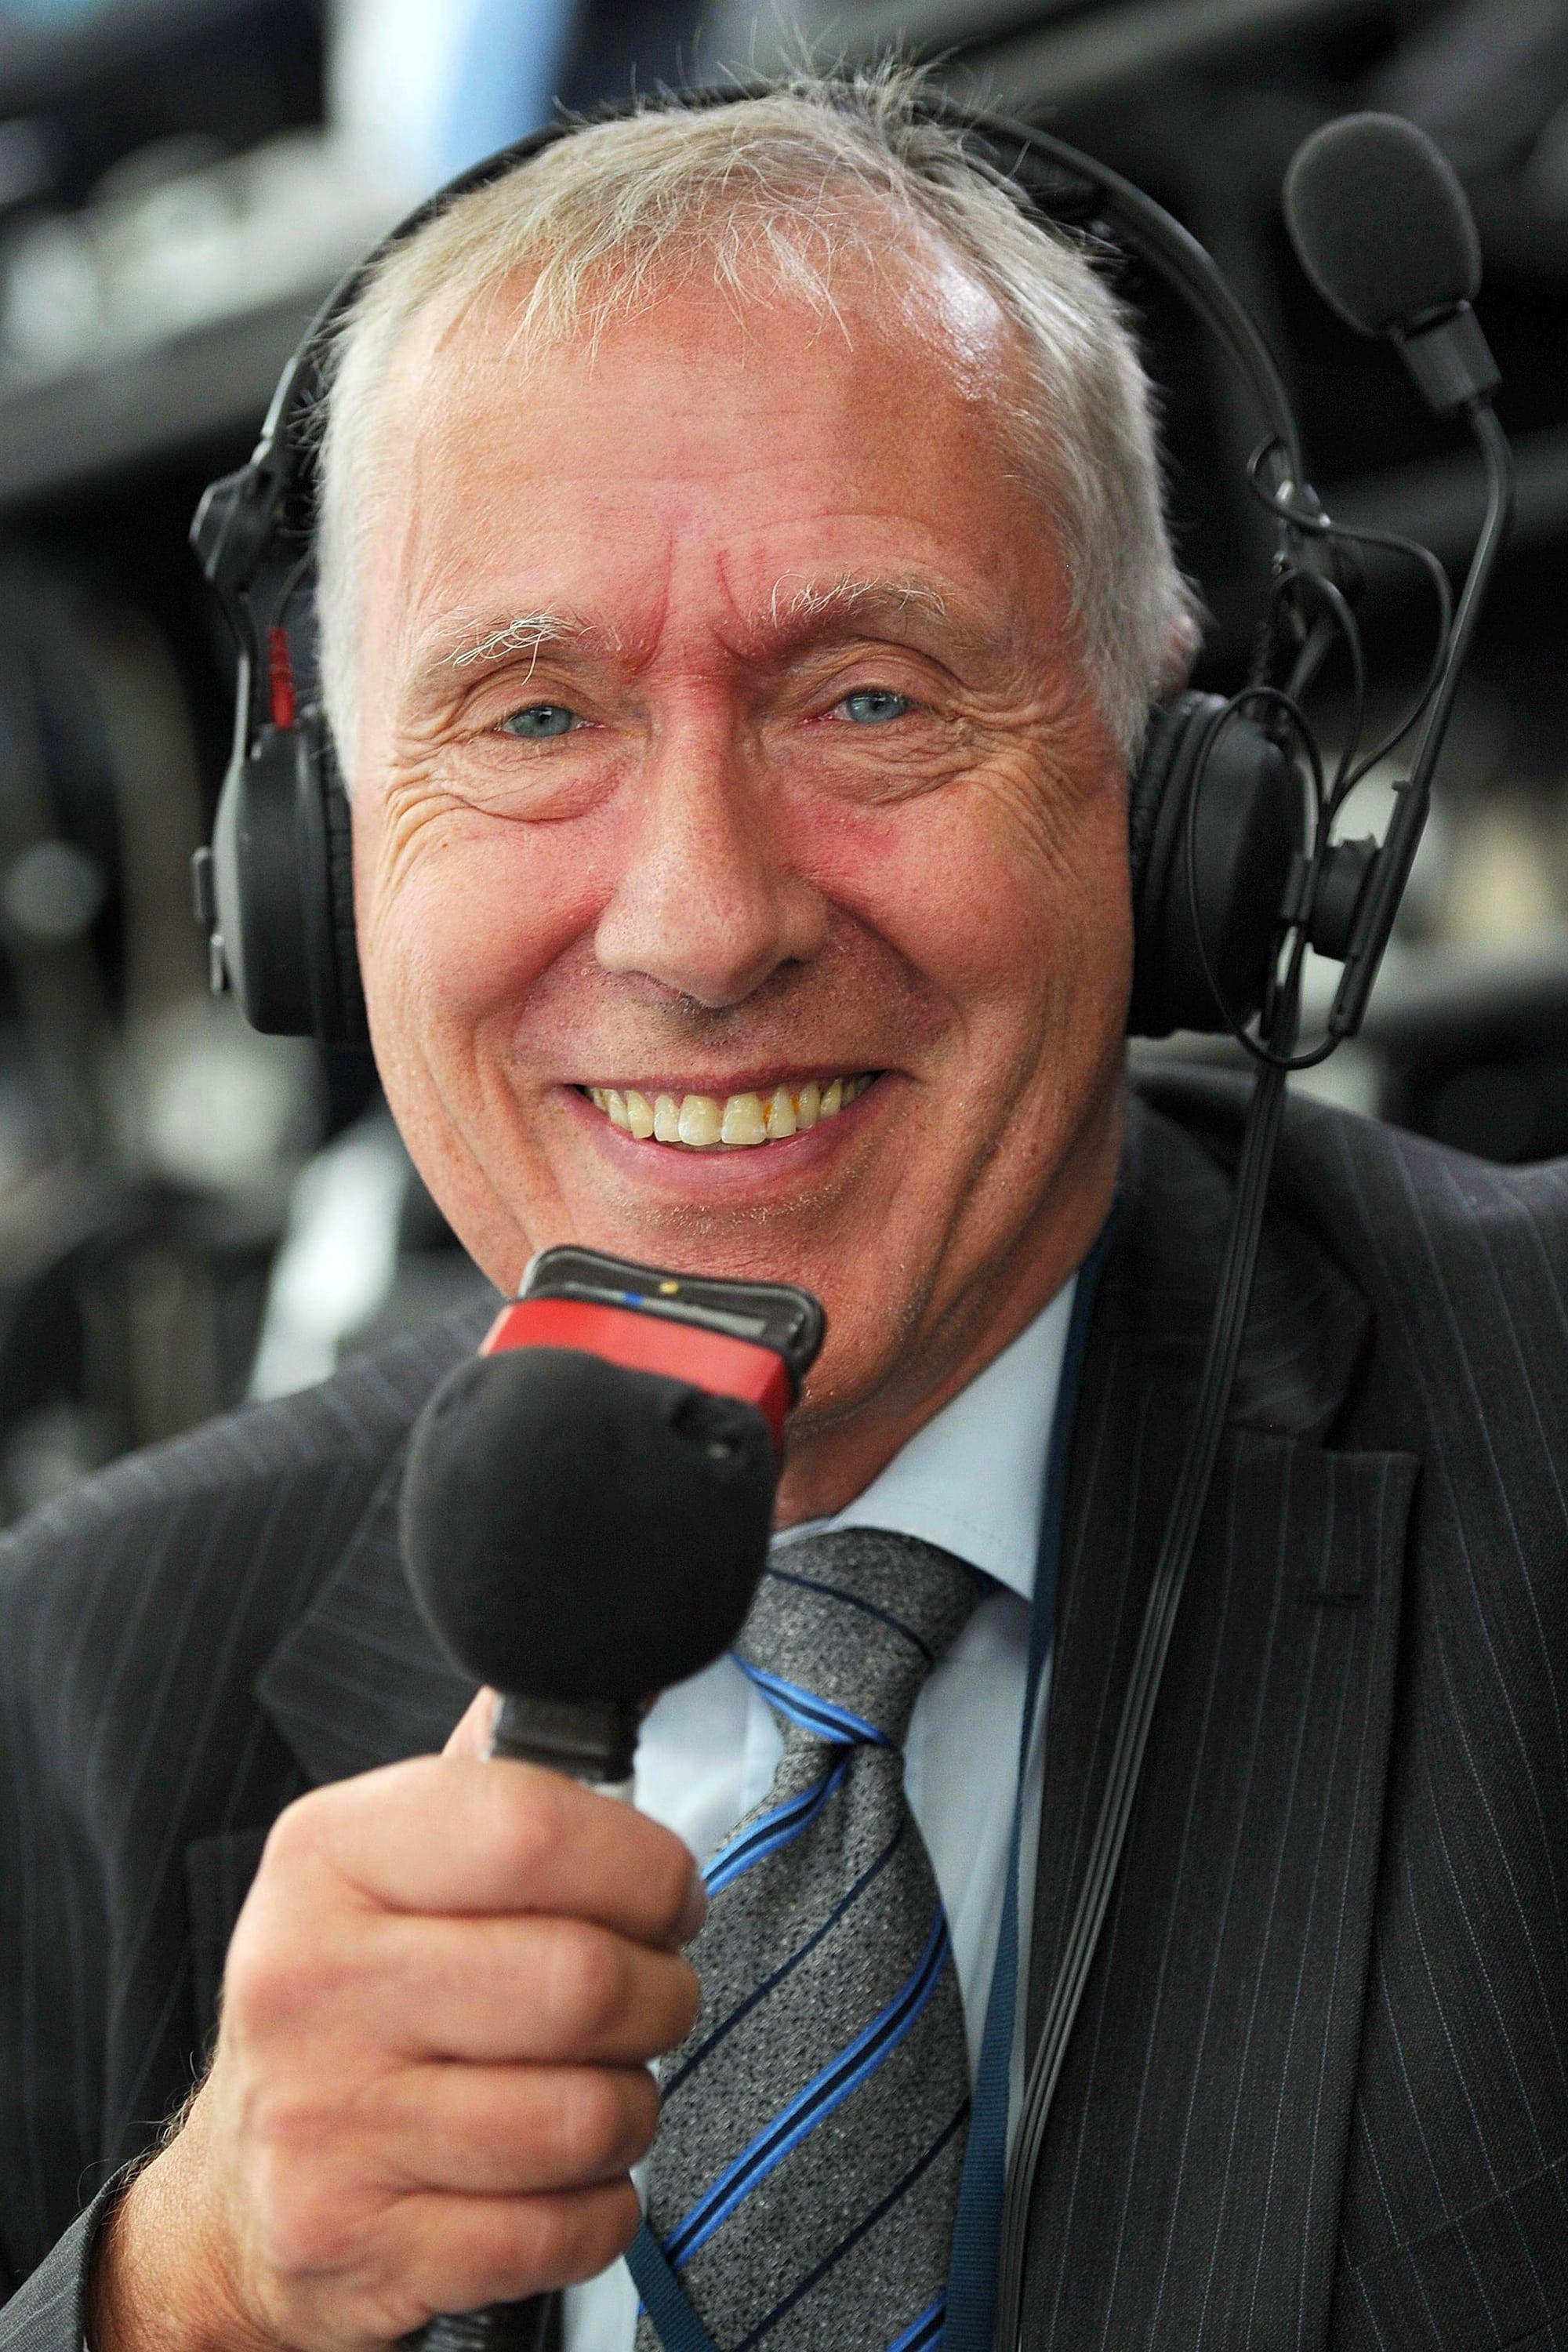 Martin Tyler | Announcer (voice) (uncredited)